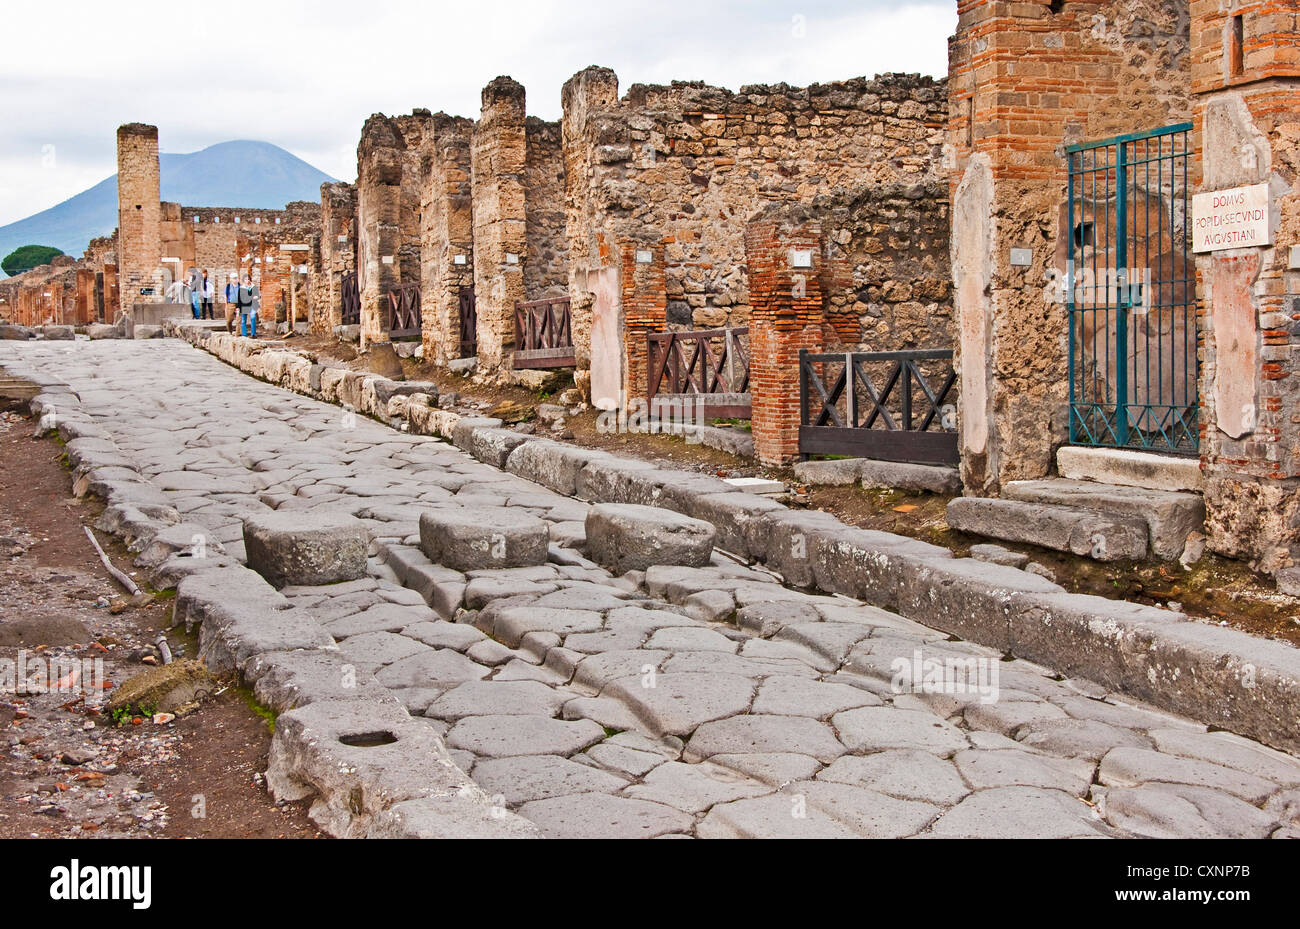 Ancient Roman city of Pompeii ruins of buildings and Via 